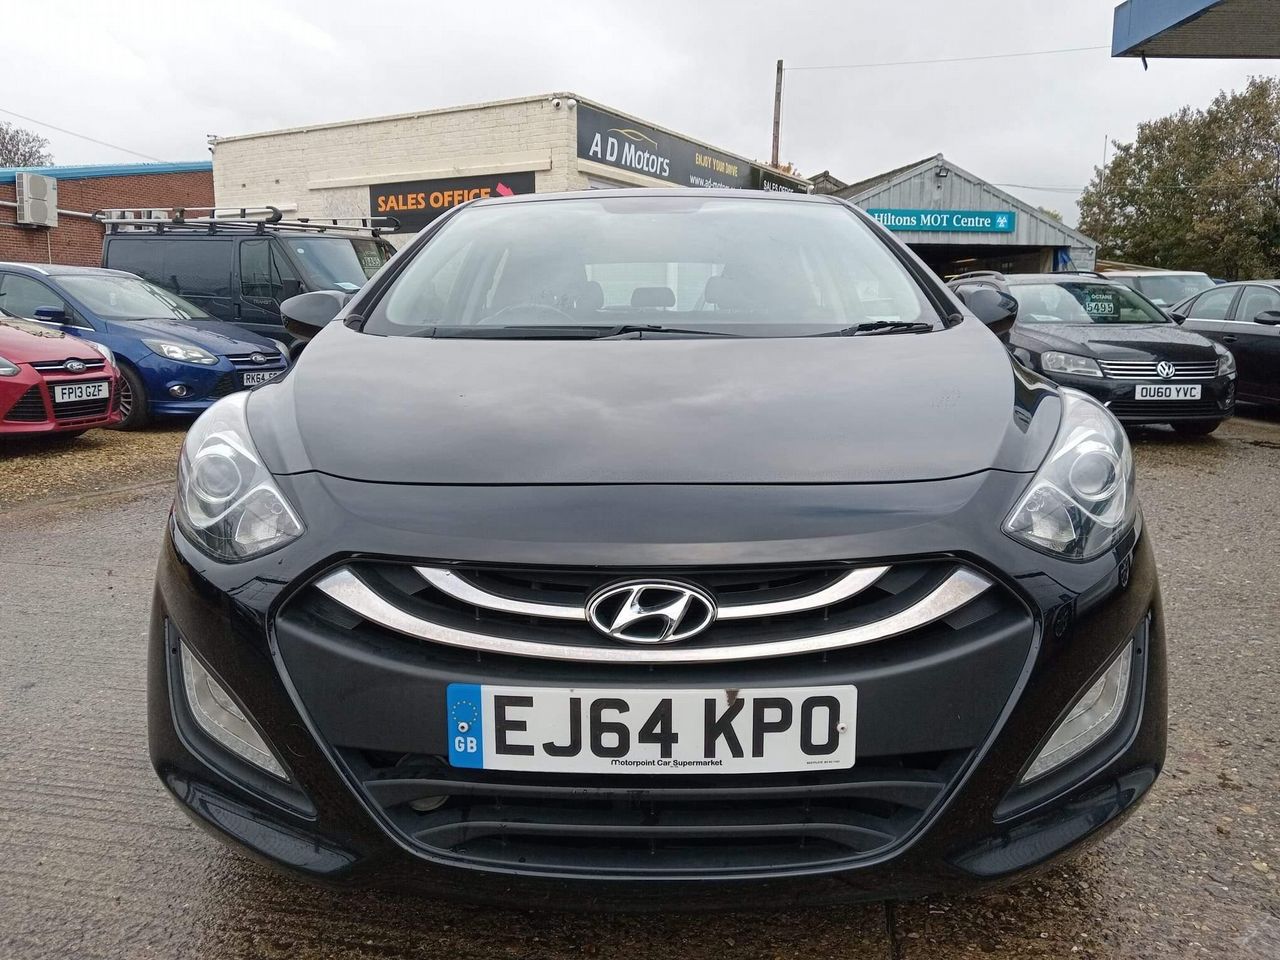 2014 Hyundai i30 1.4 Active Euro 5 5dr - Picture 3 of 39